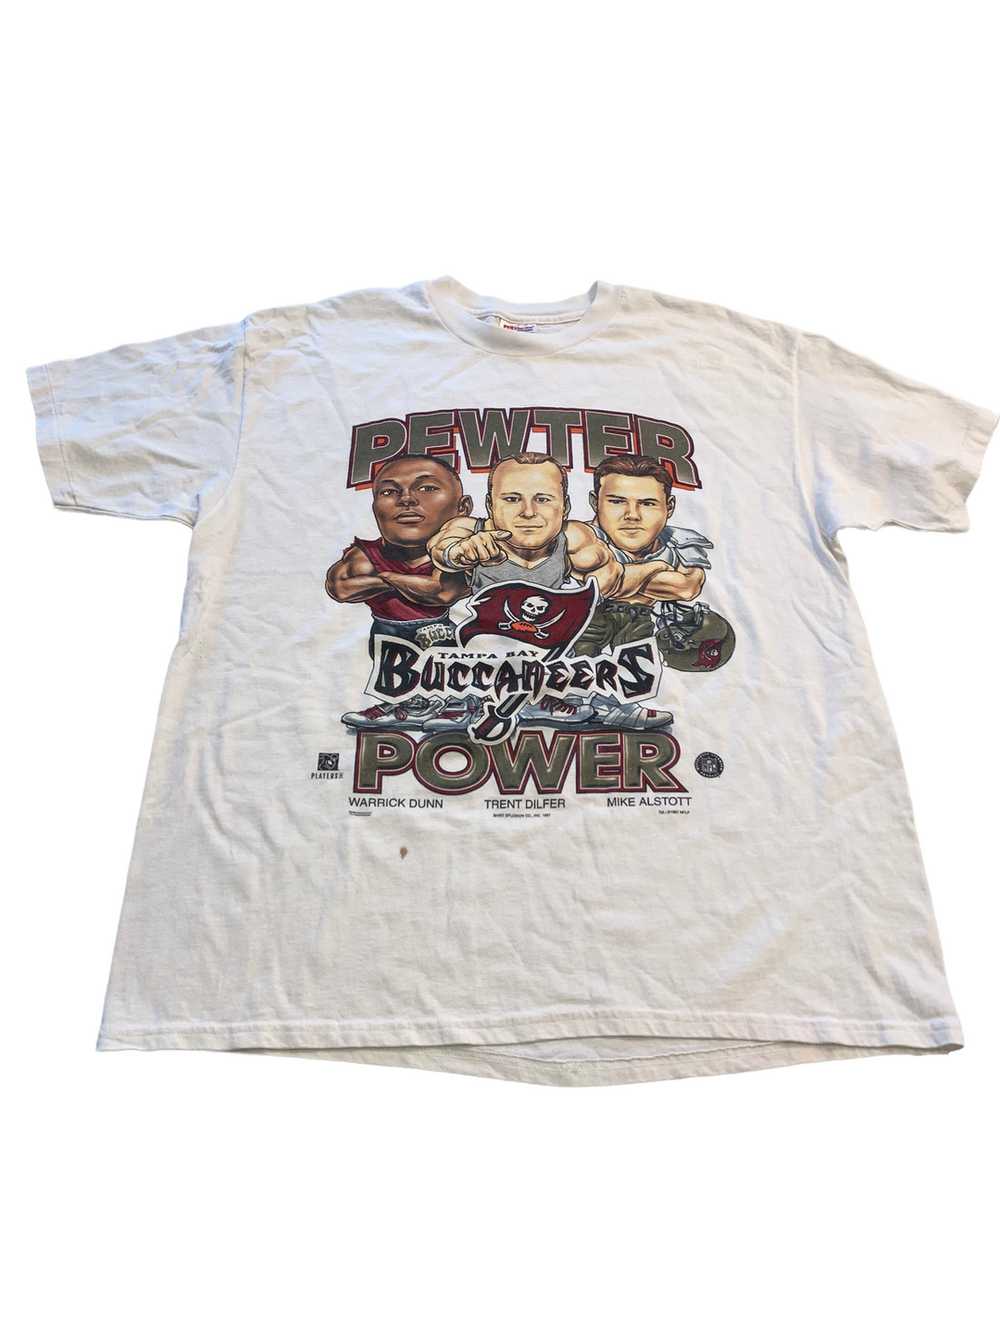 Buccaneers Pewter Power Tshirt size XL - image 4